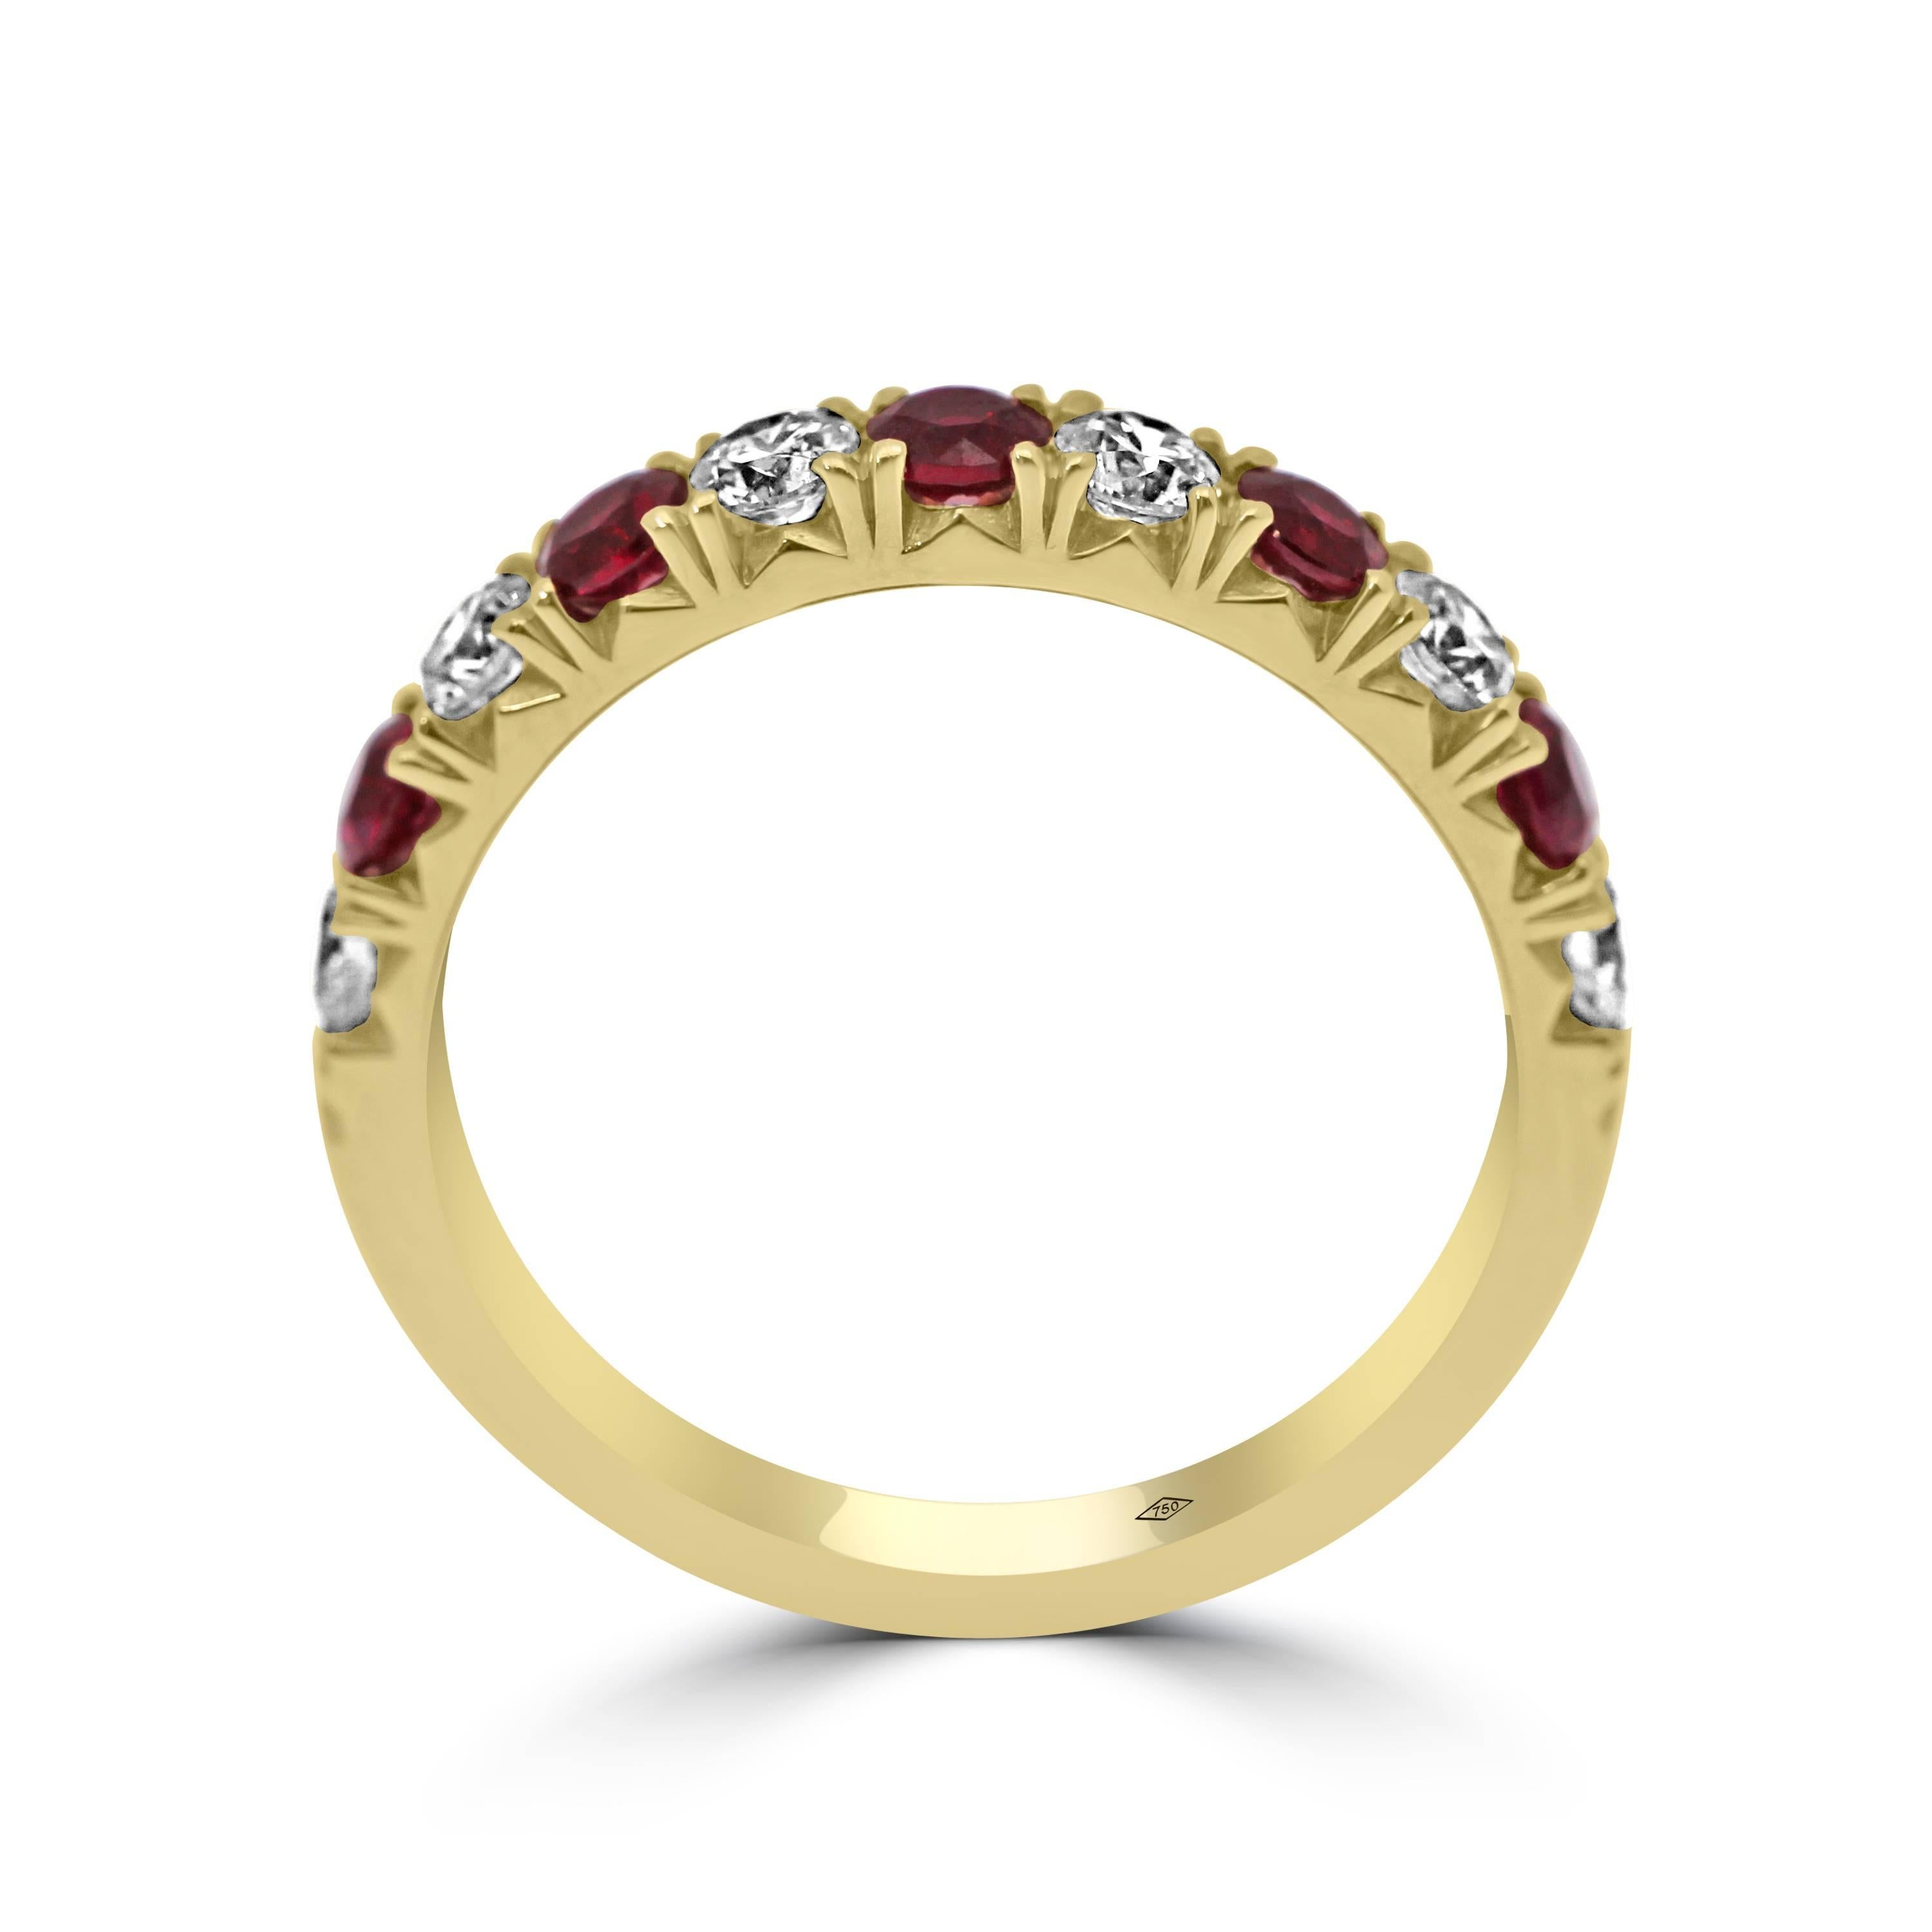 Round Cut Eternity Band Half Set with Diamonds and Ruby gemstones